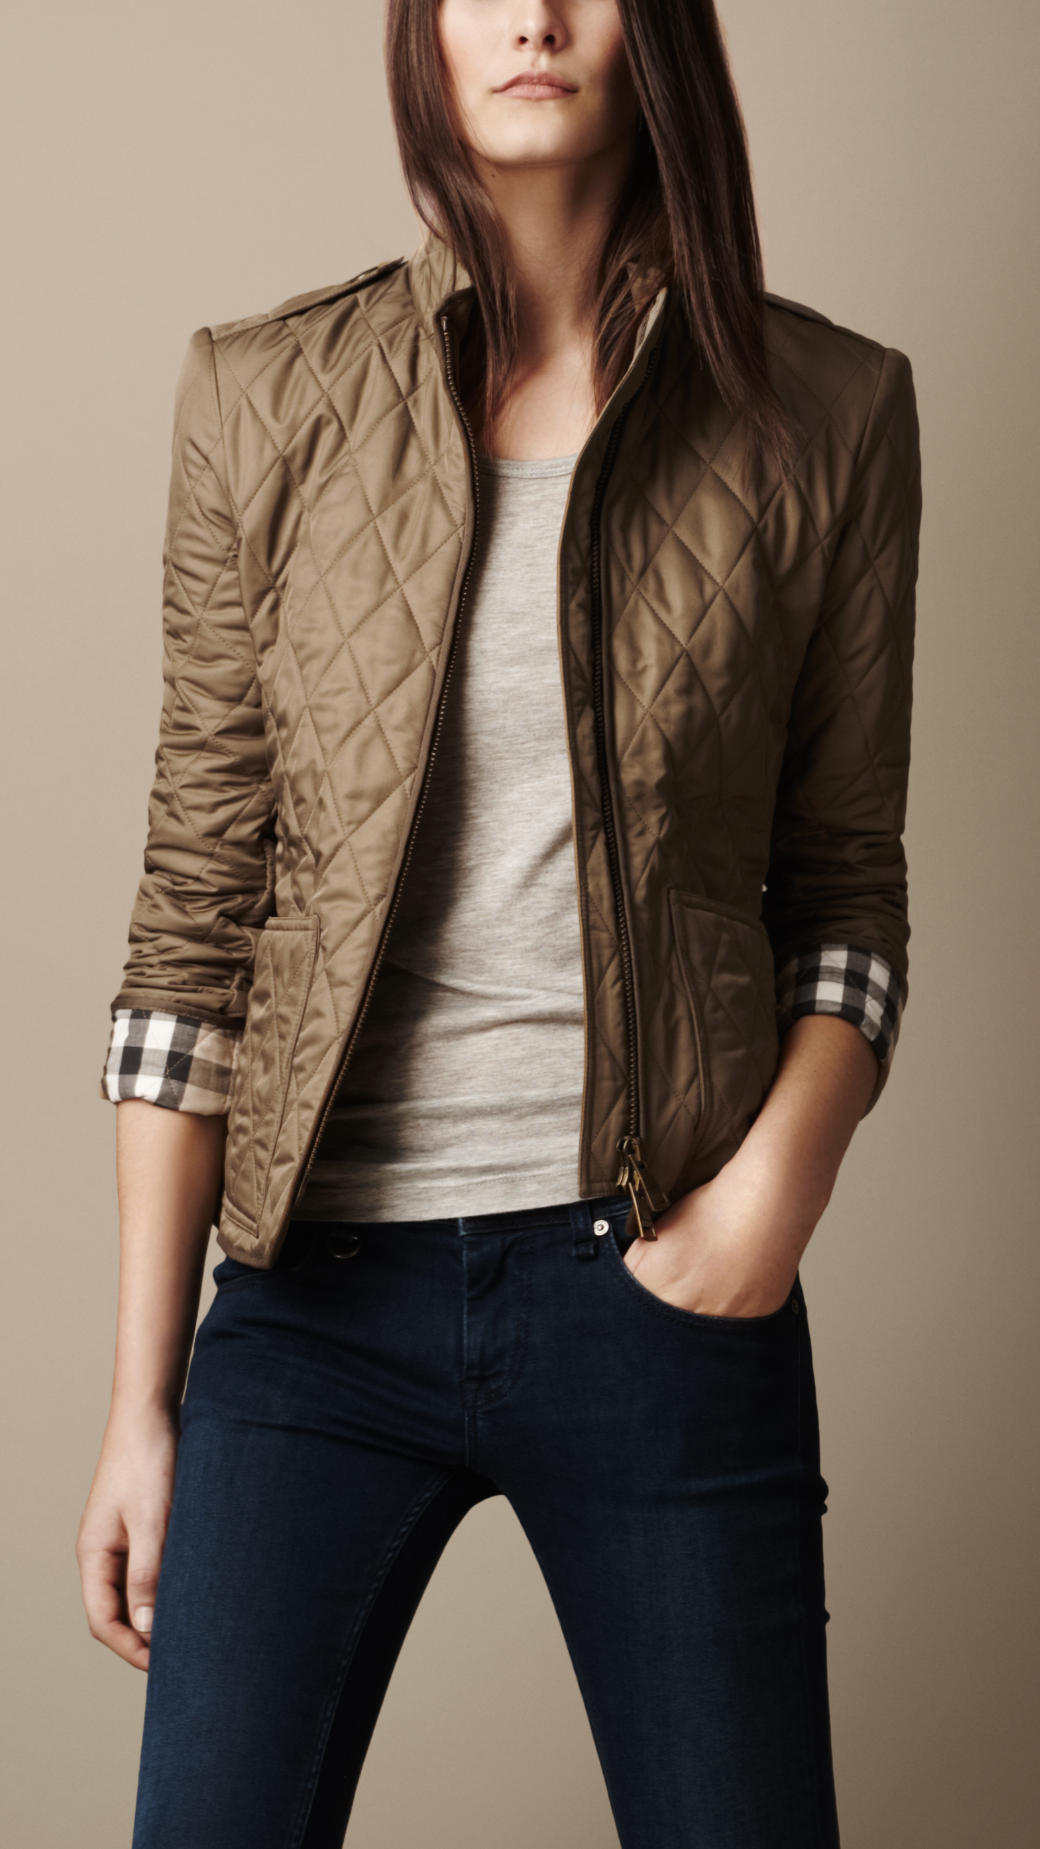 Lyst - Burberry Brit Check Cuff Quilted Jacket in Brown